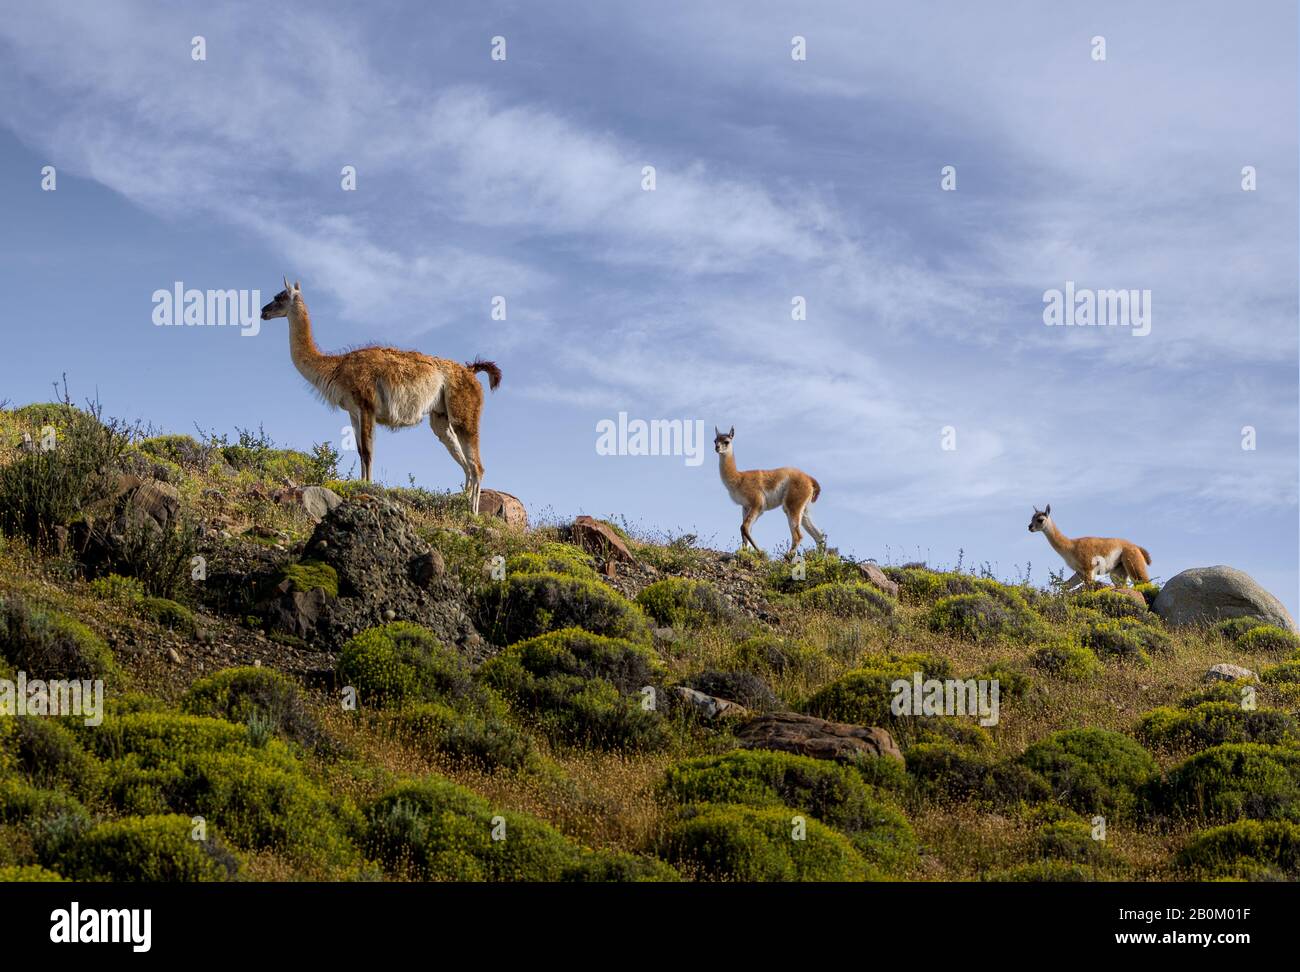 Family of 3 Guanacos with youngs walking by on ridgeline in Patagonia Stock Photo